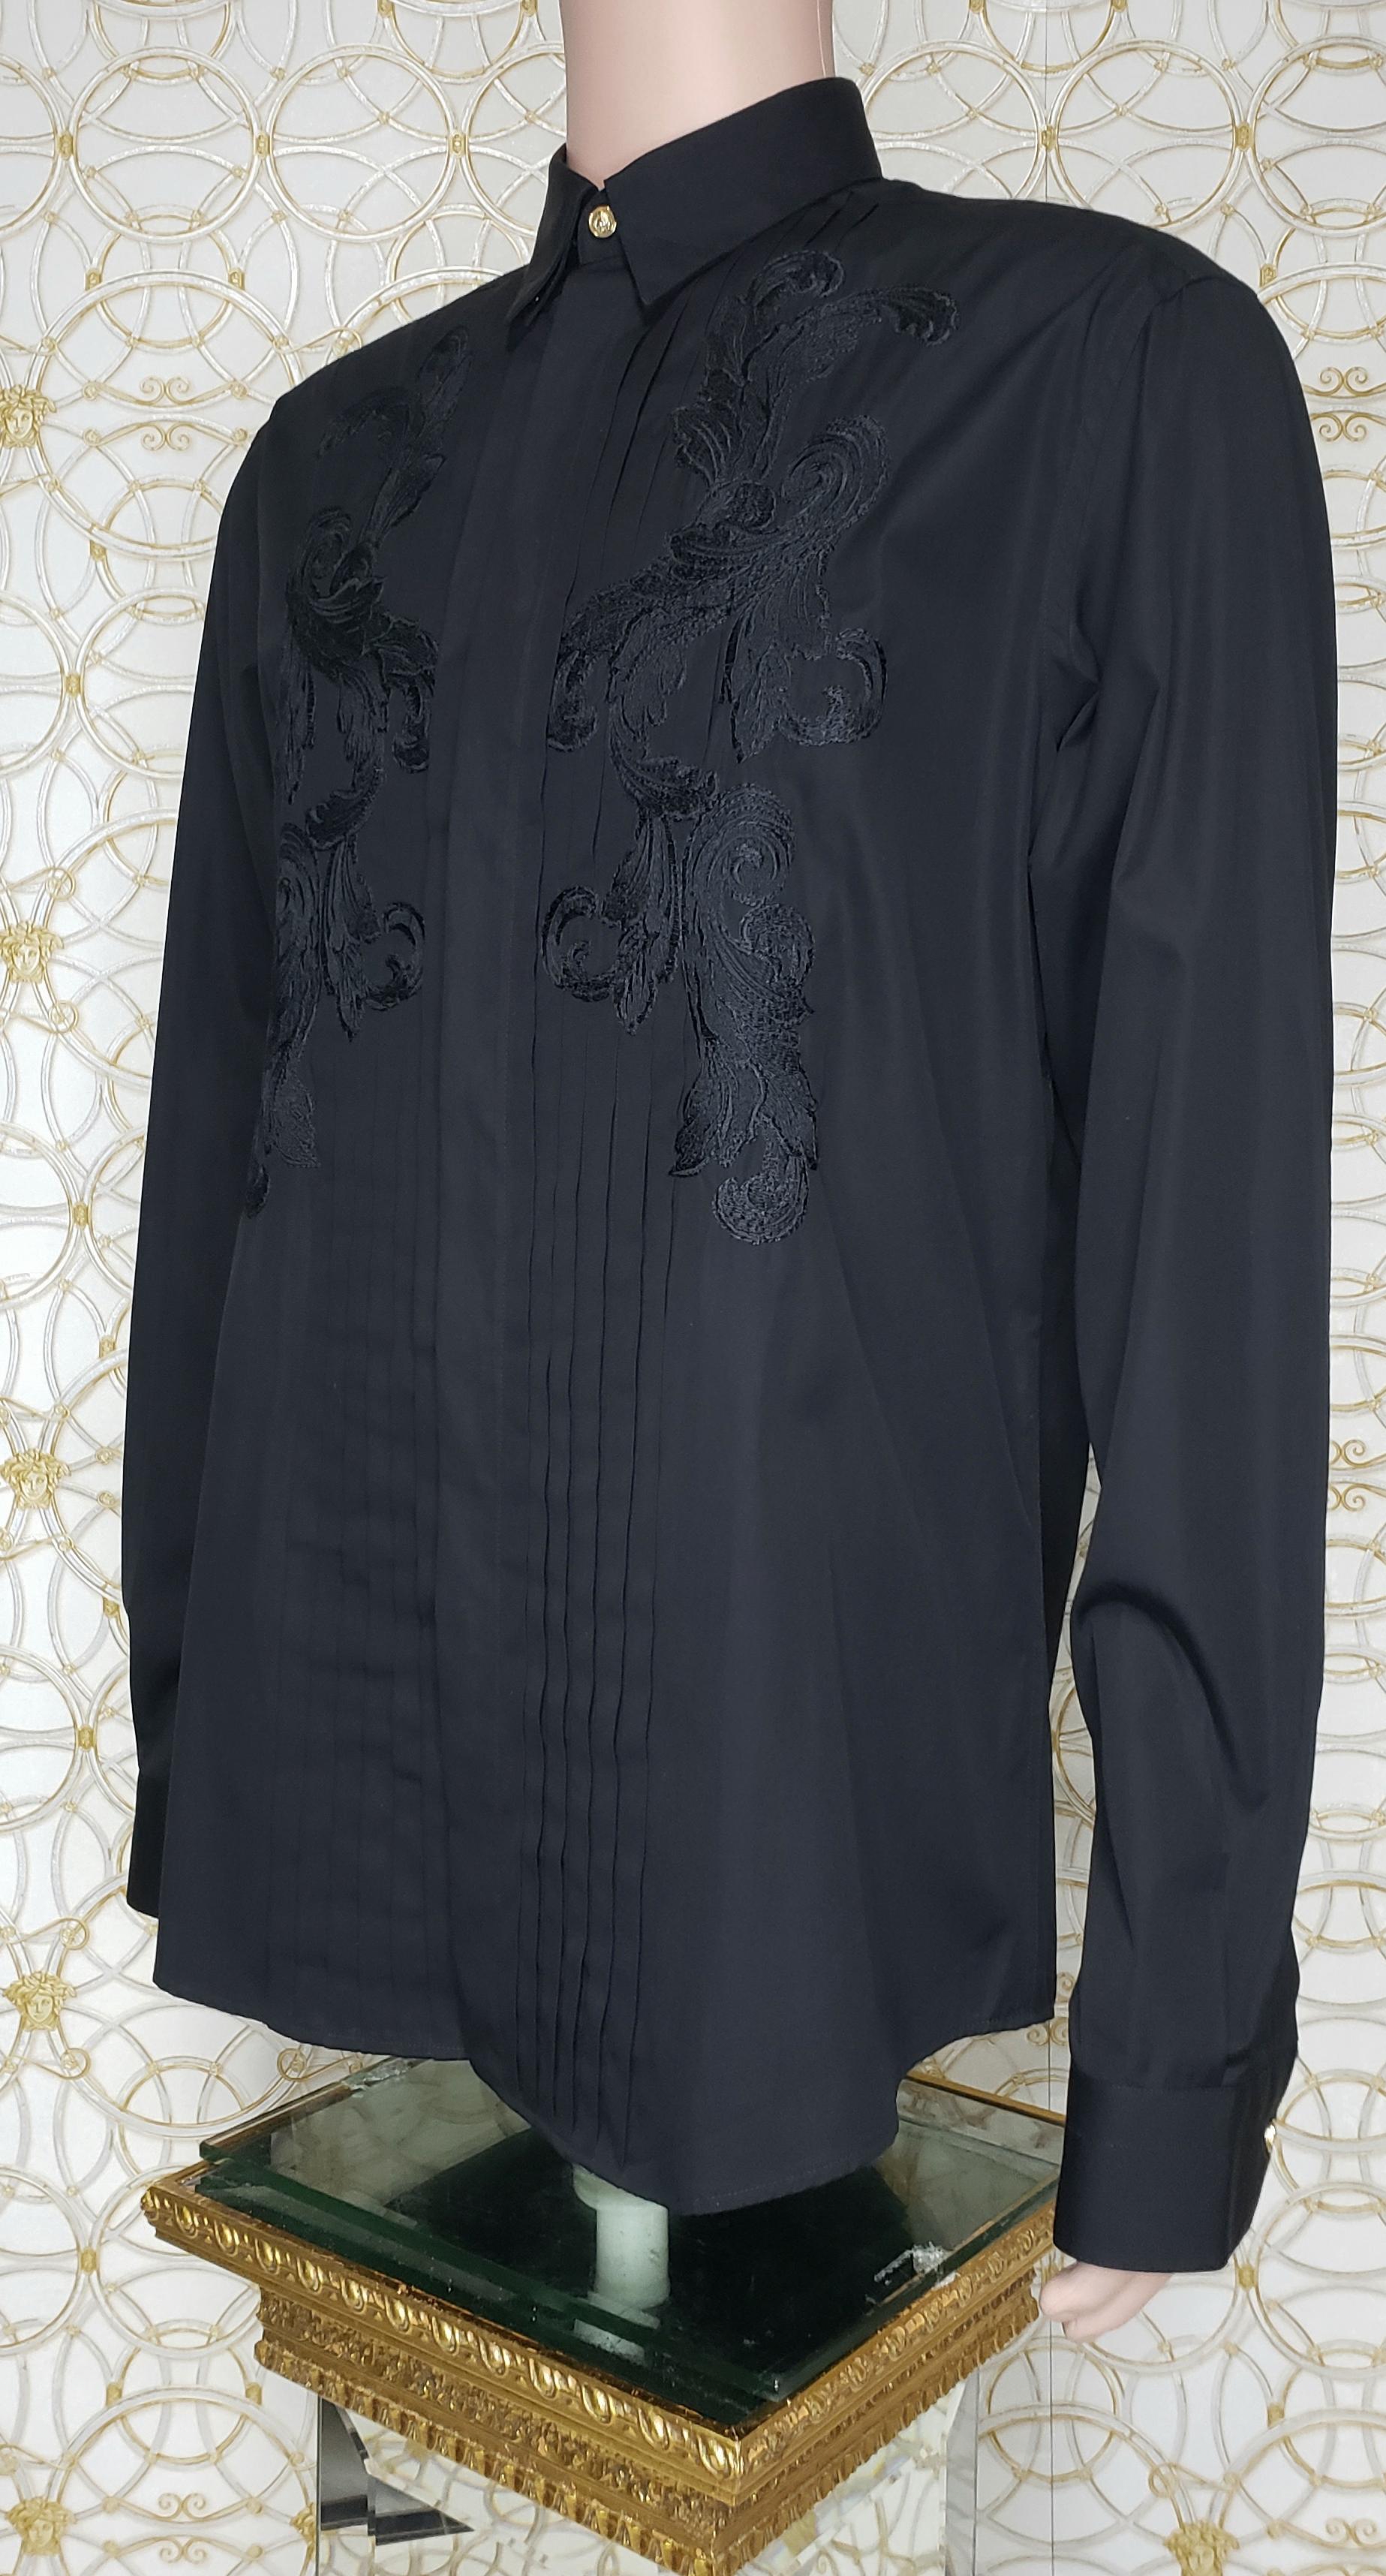 VERSACE 

BRAND NEW COTTON SHIRT with EMBROIDERED PRINT

Relaxed fit
Signature buttons
Long sleeves 

Color: Black


Content: 100% cotton
IT Size 52 - US XL

European collar 41
   
Neck: 16 1/2